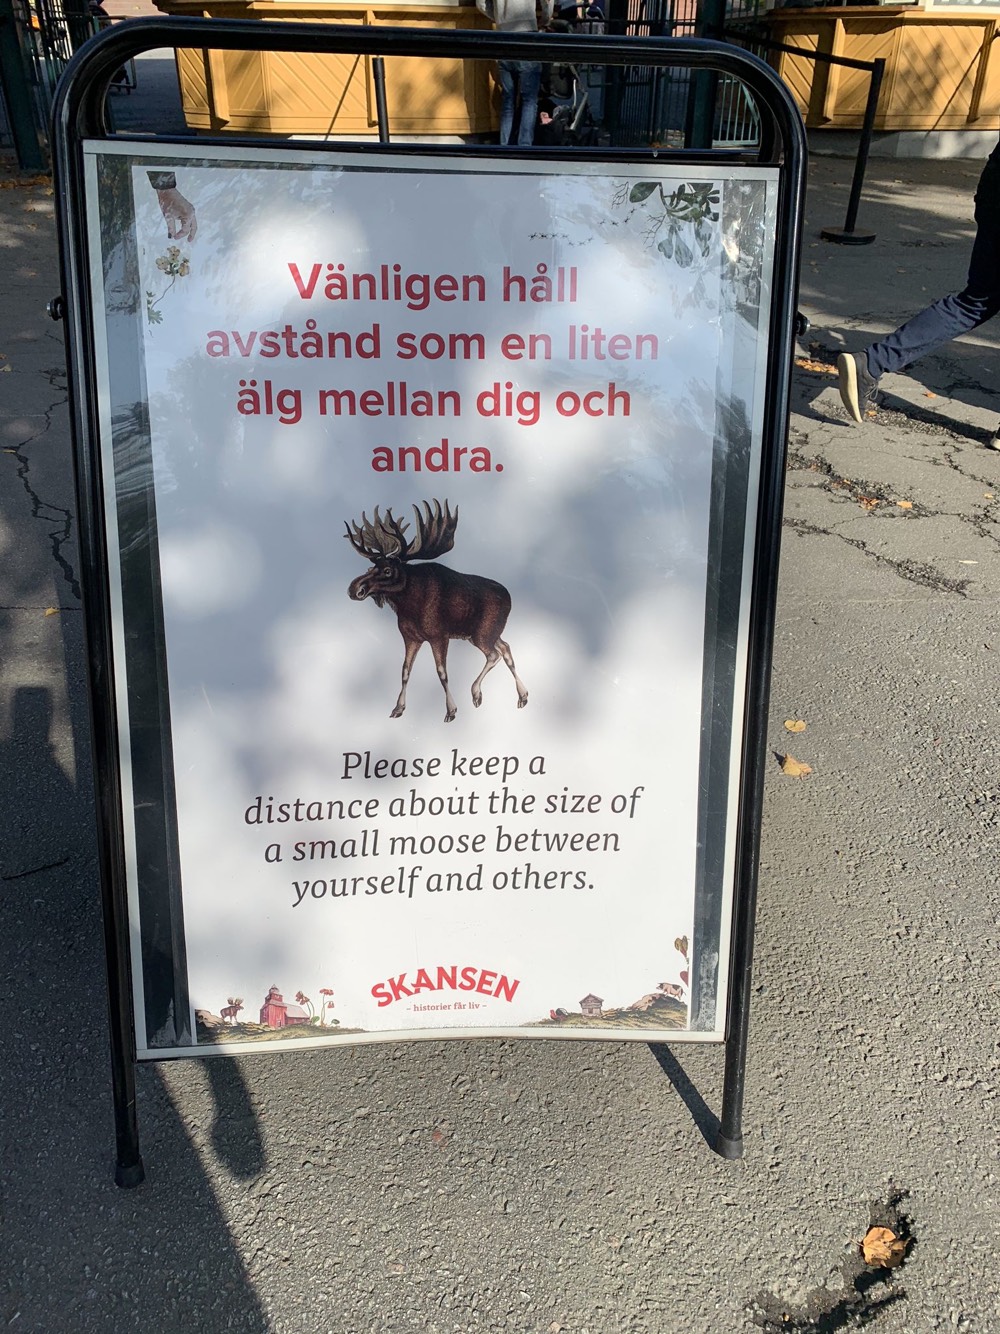 Local social distance signs: a small moose apart